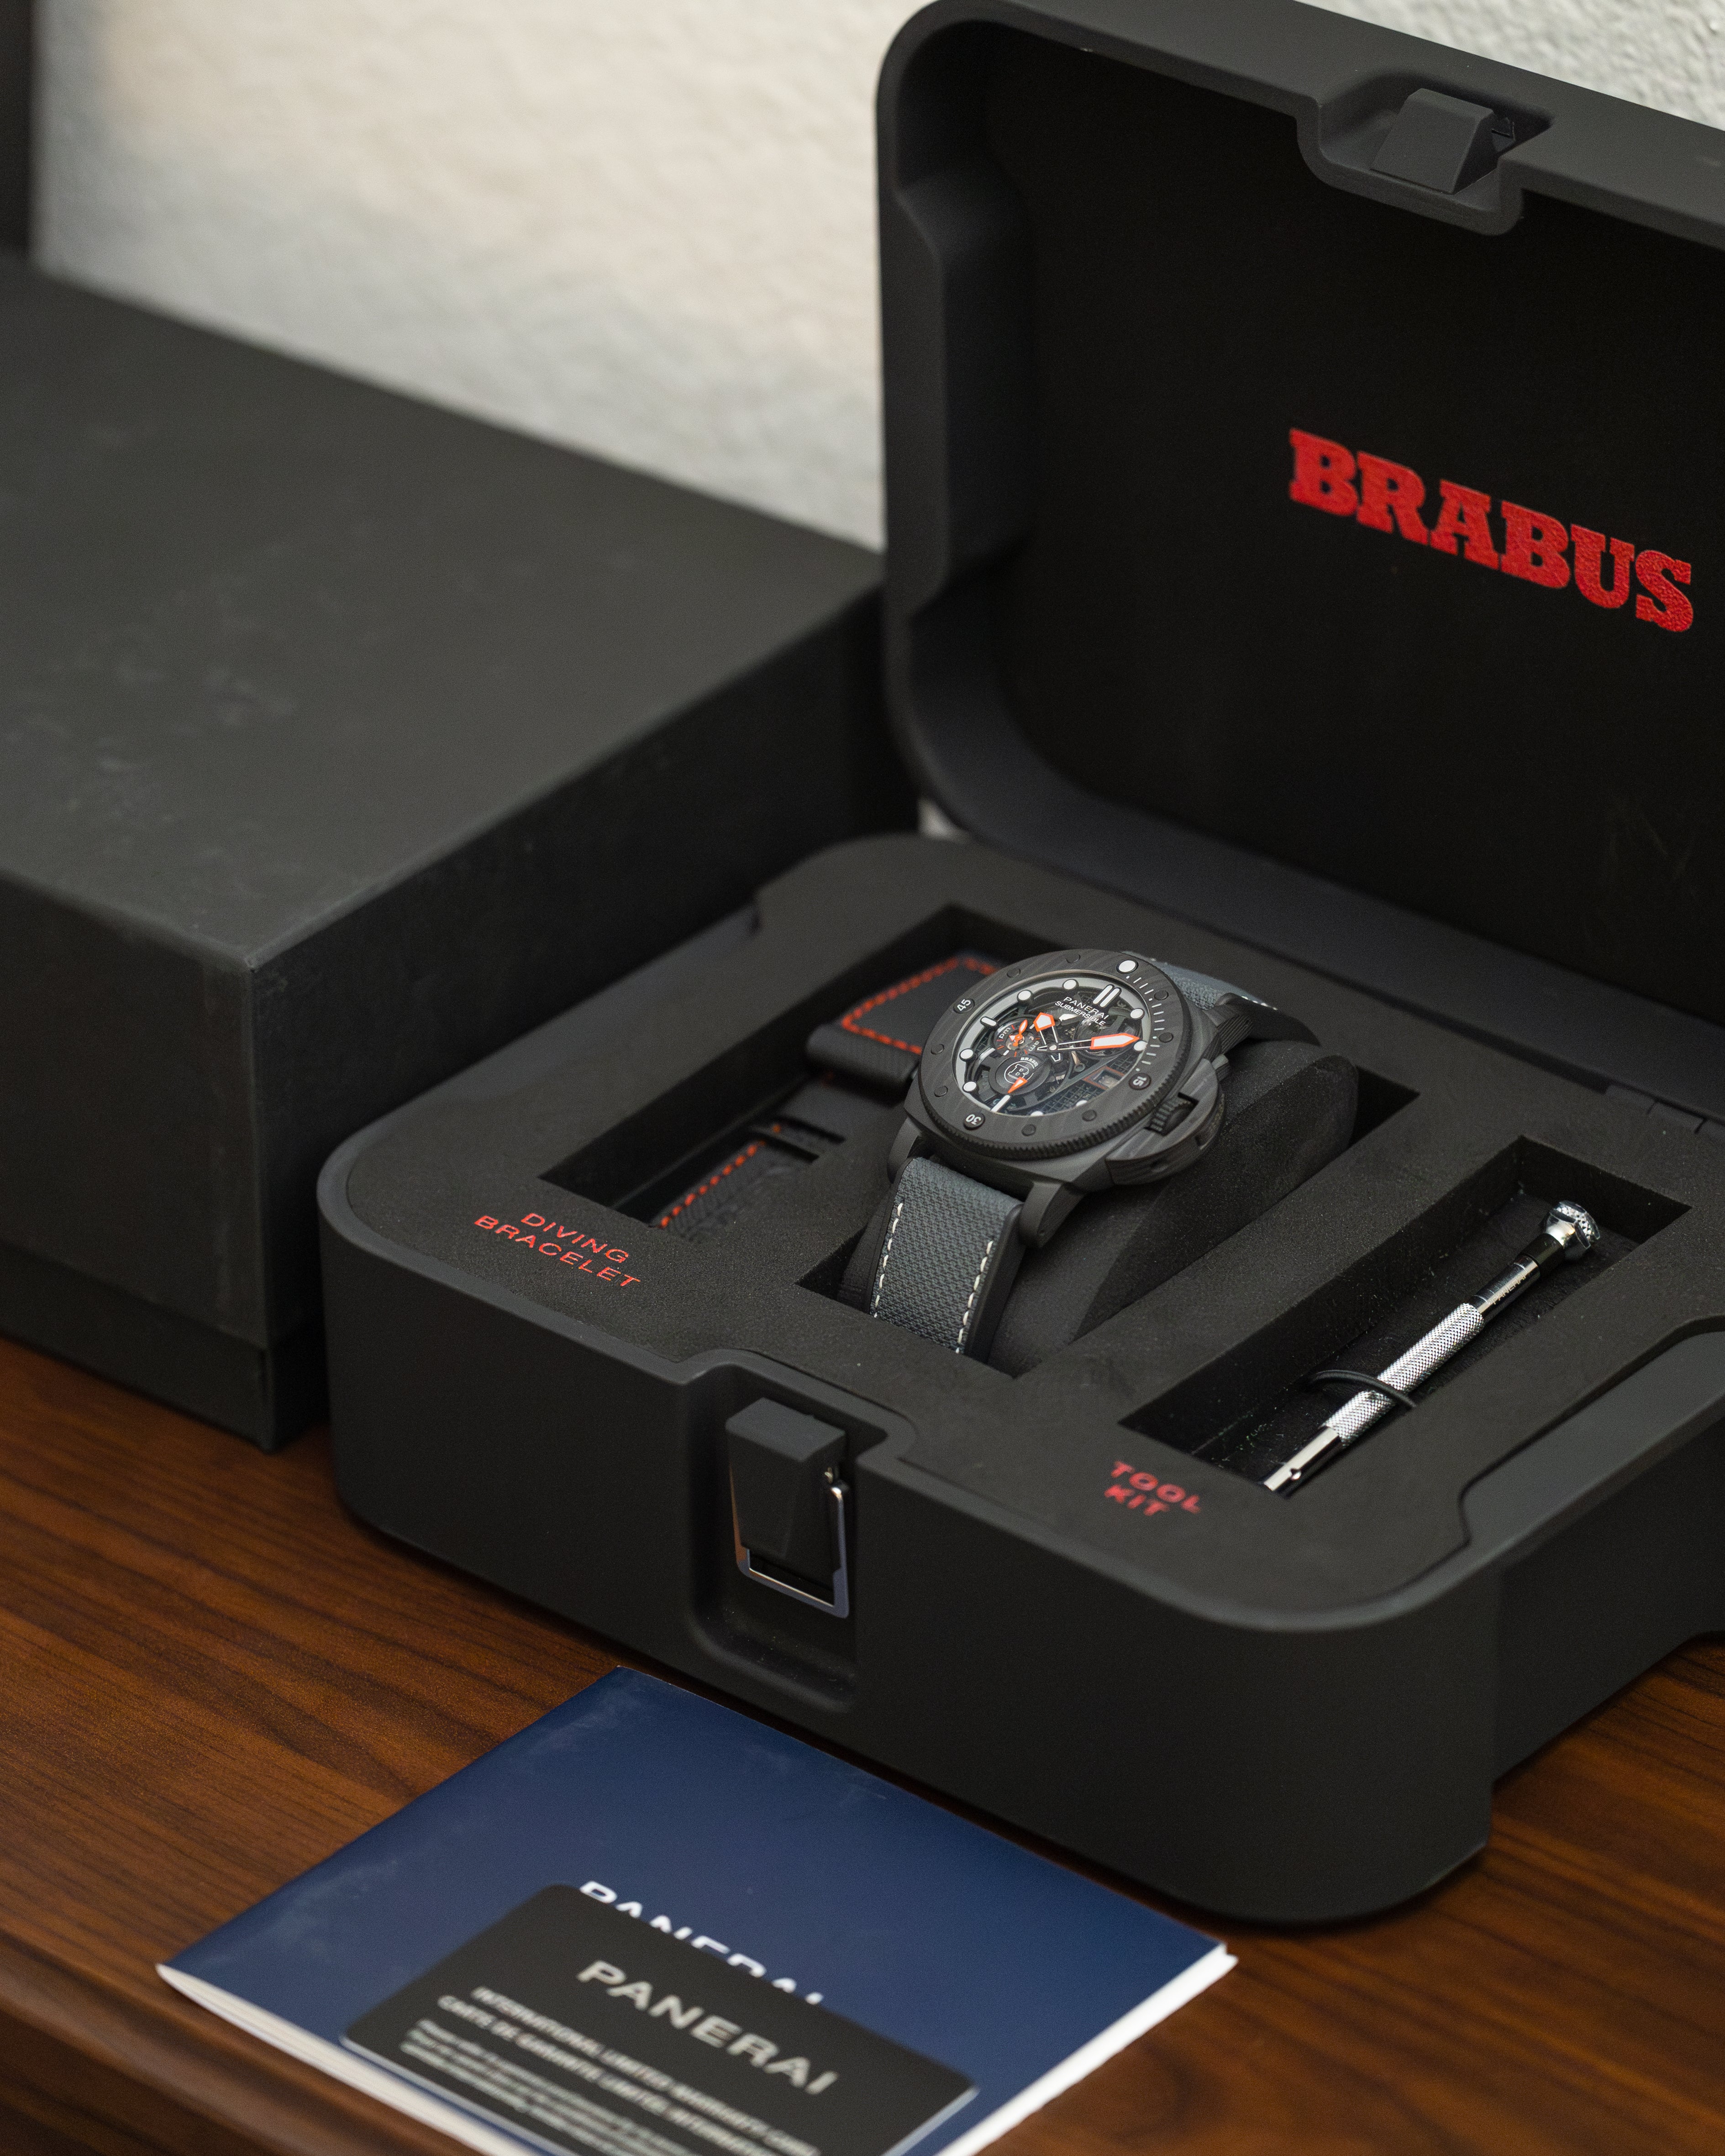 Submersible S Brabus Black Ops Edition Ref. PAM1240